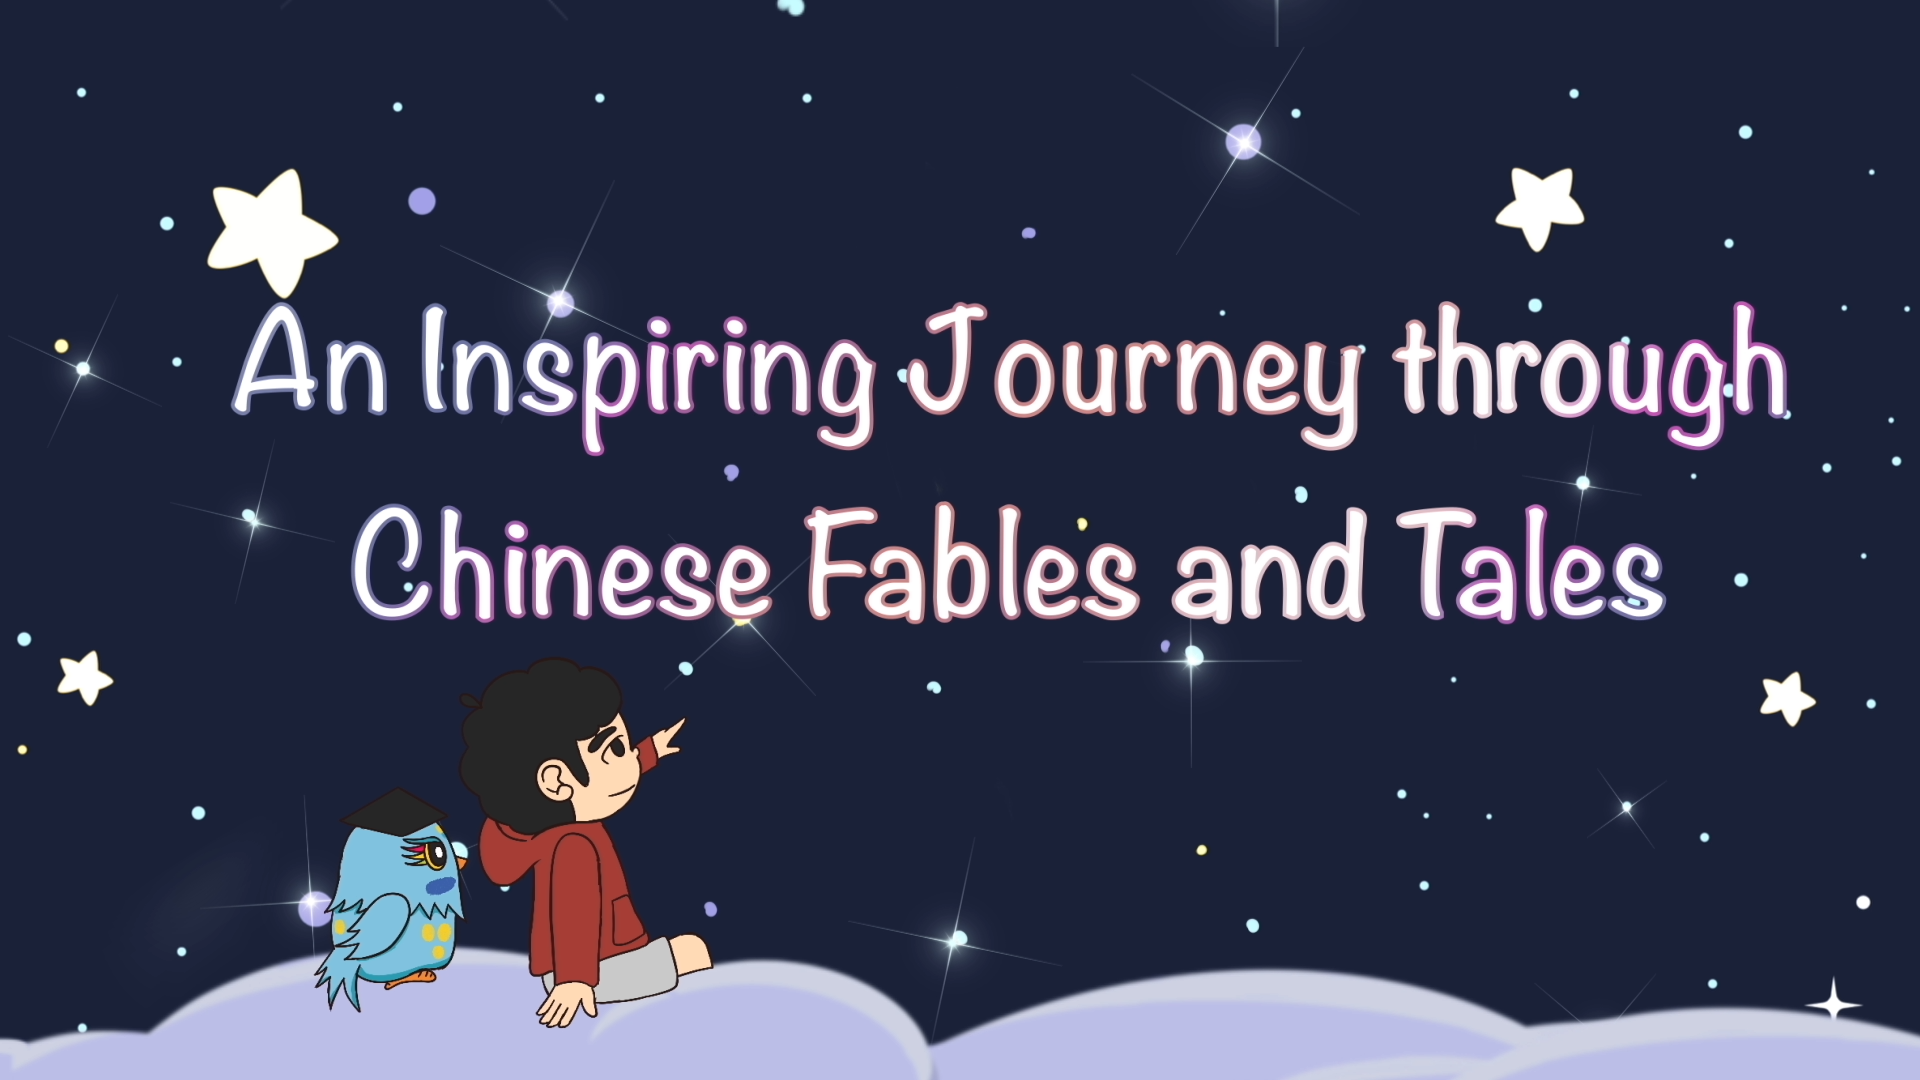 An English Animation Series “An Inspiring Journey through Chinese Fables and Tales”